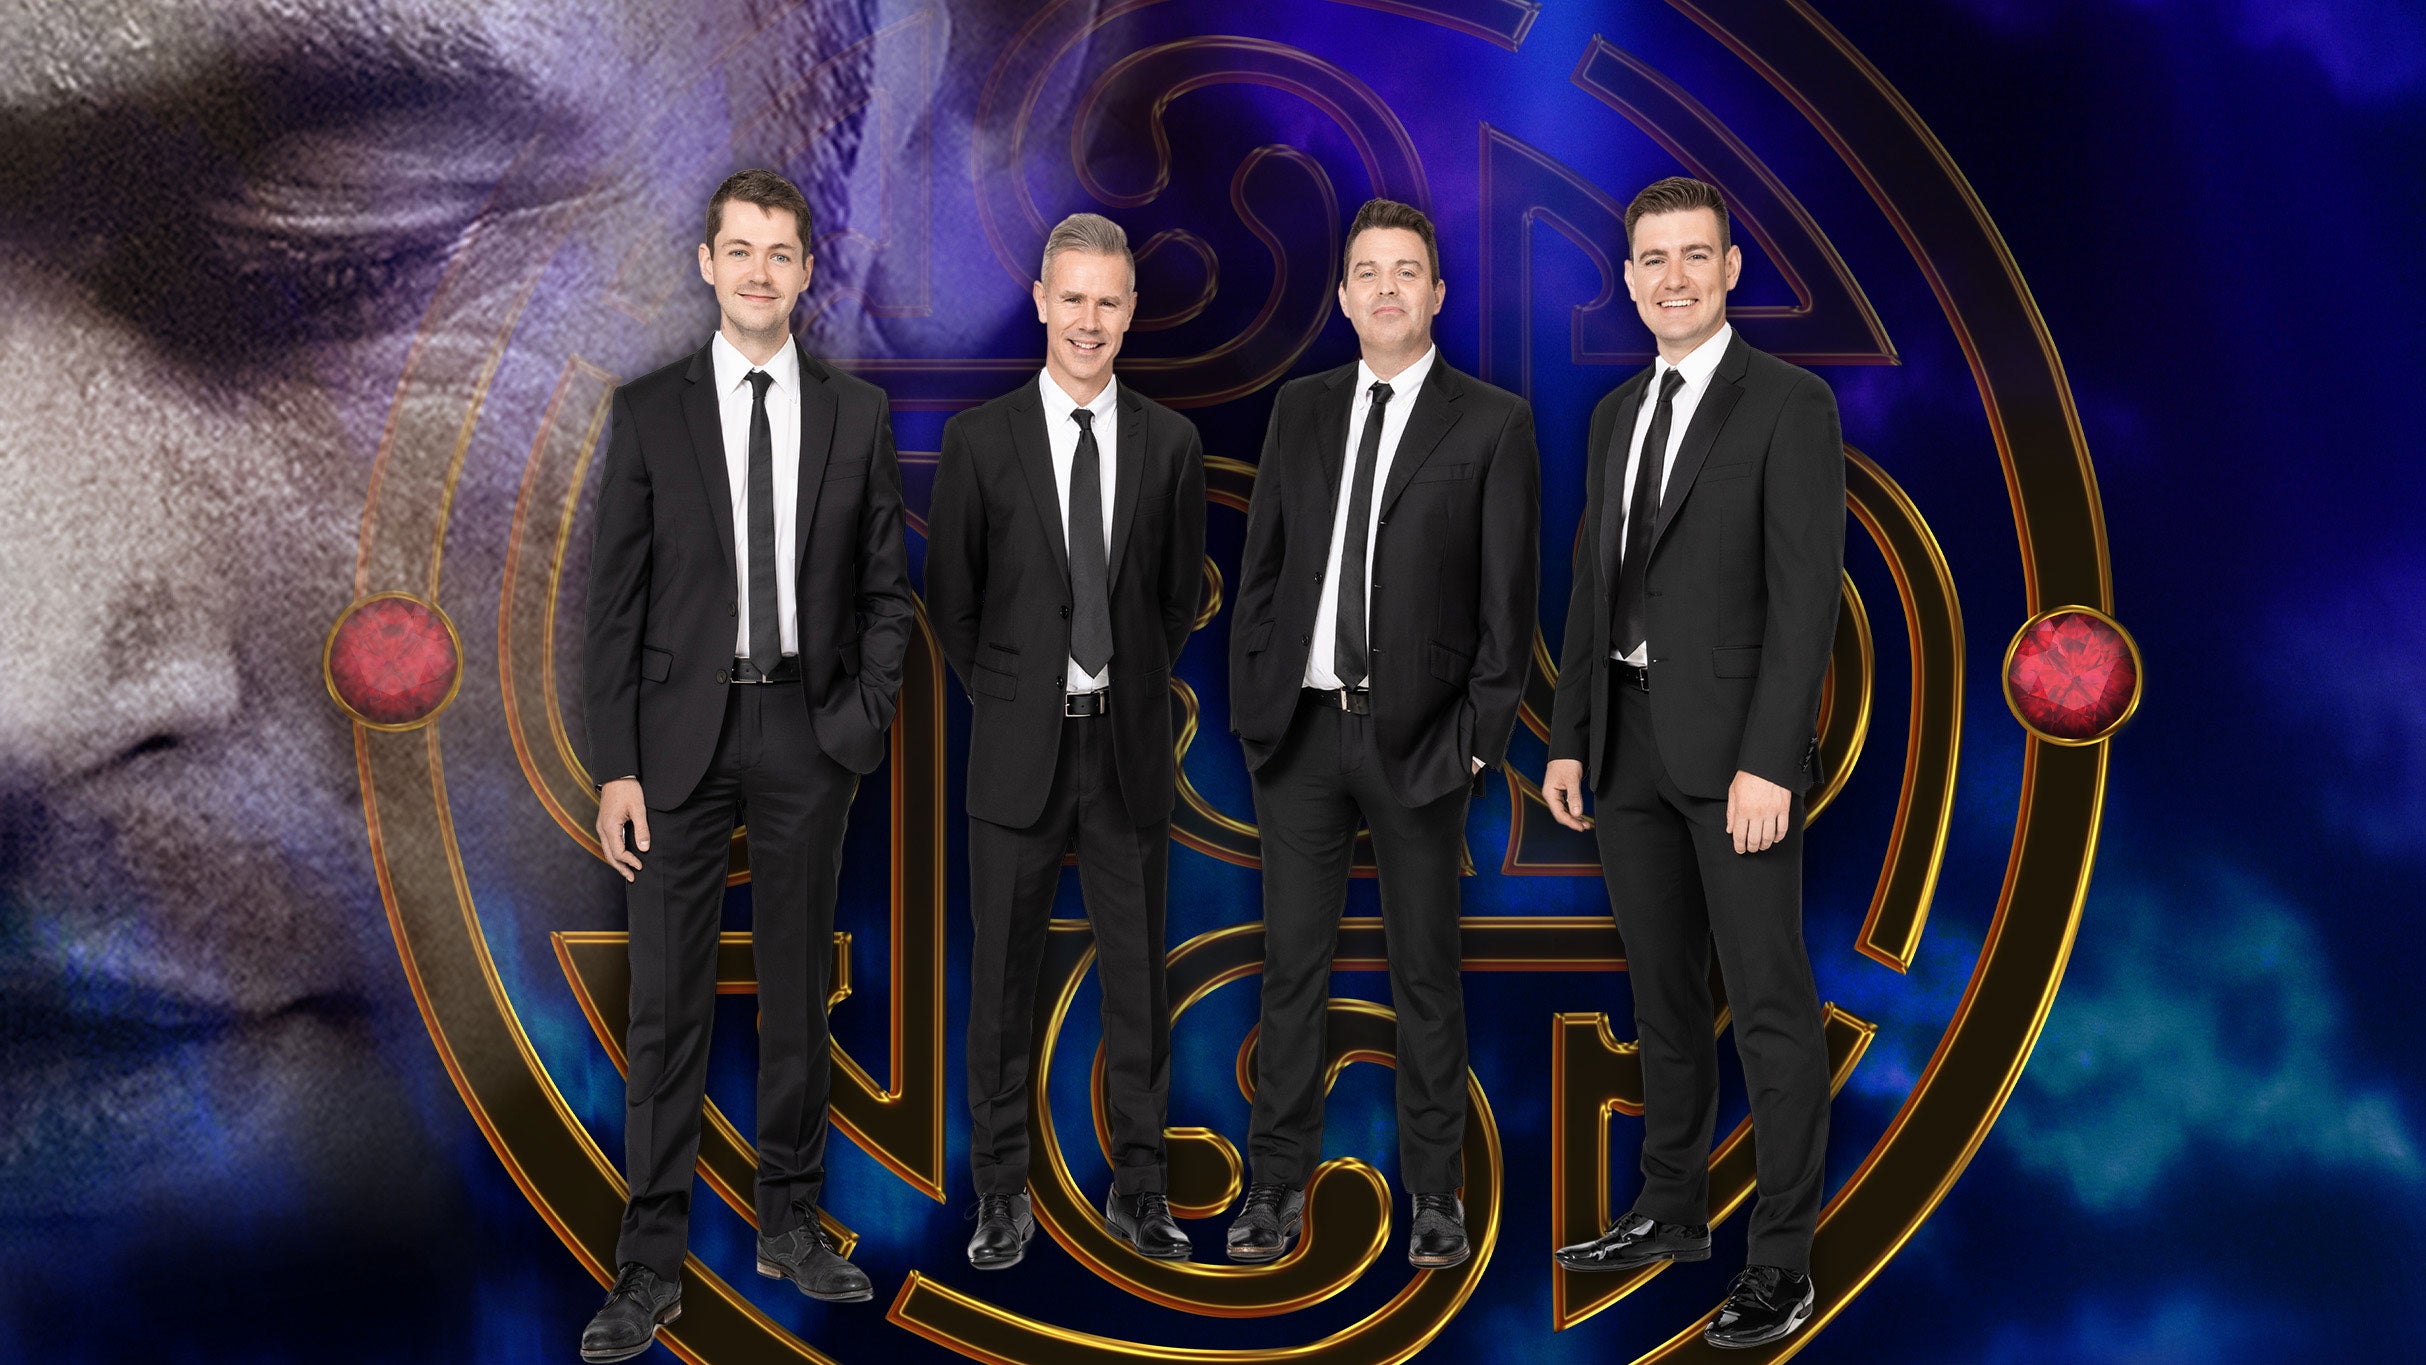 Celtic Thunder A Celtic Odyssey free presale code for show tickets in Rama, ON (Casino Rama Resort)